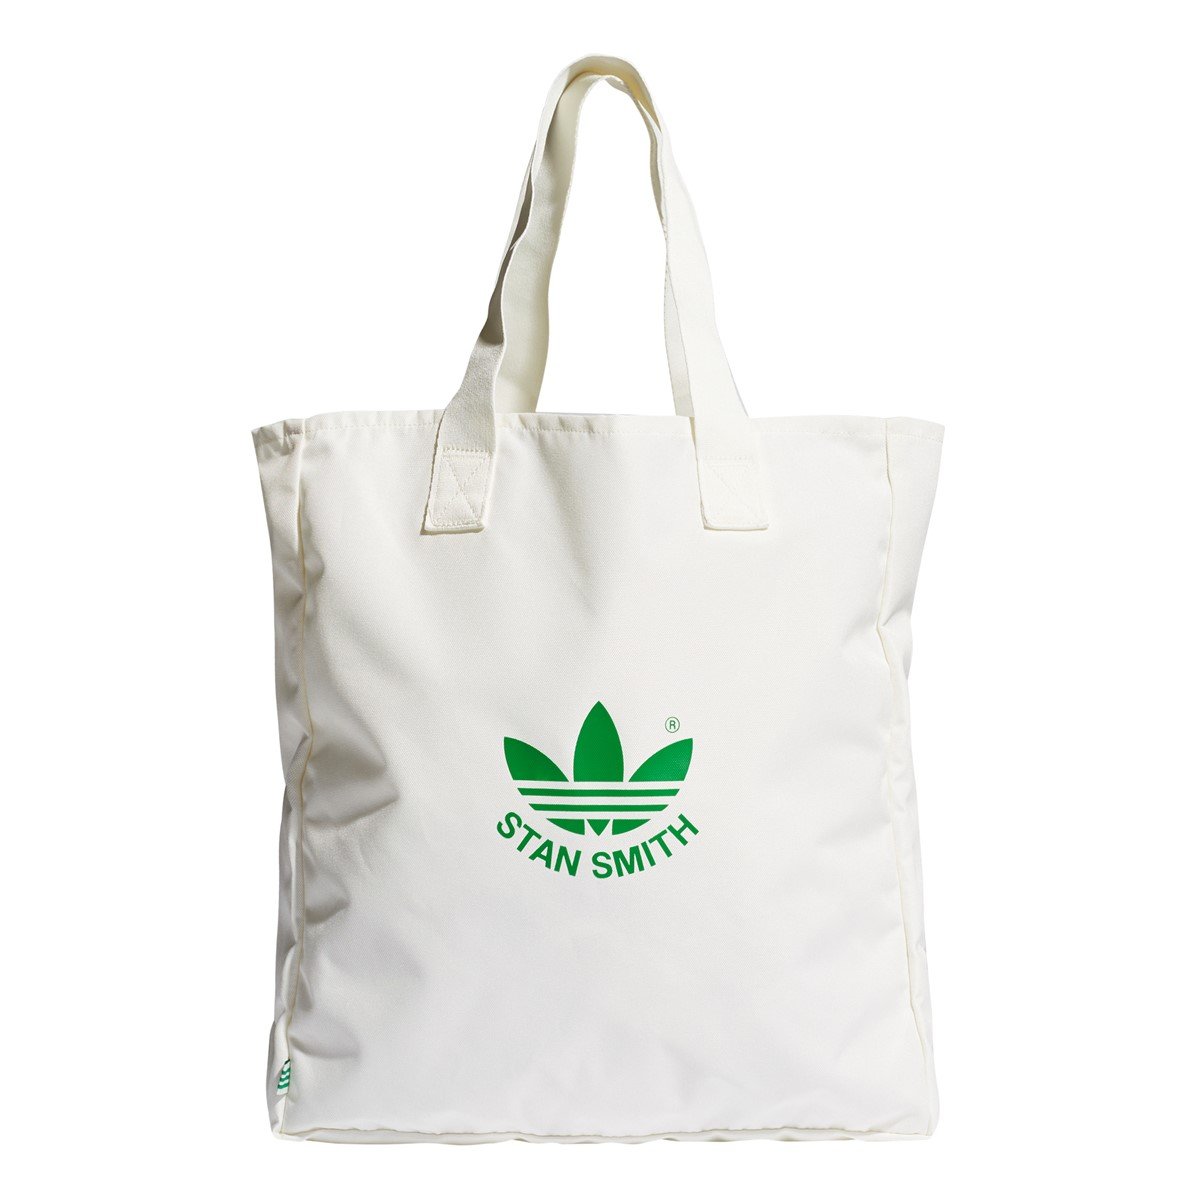 Stan Smith Shopper Bag in White and Green